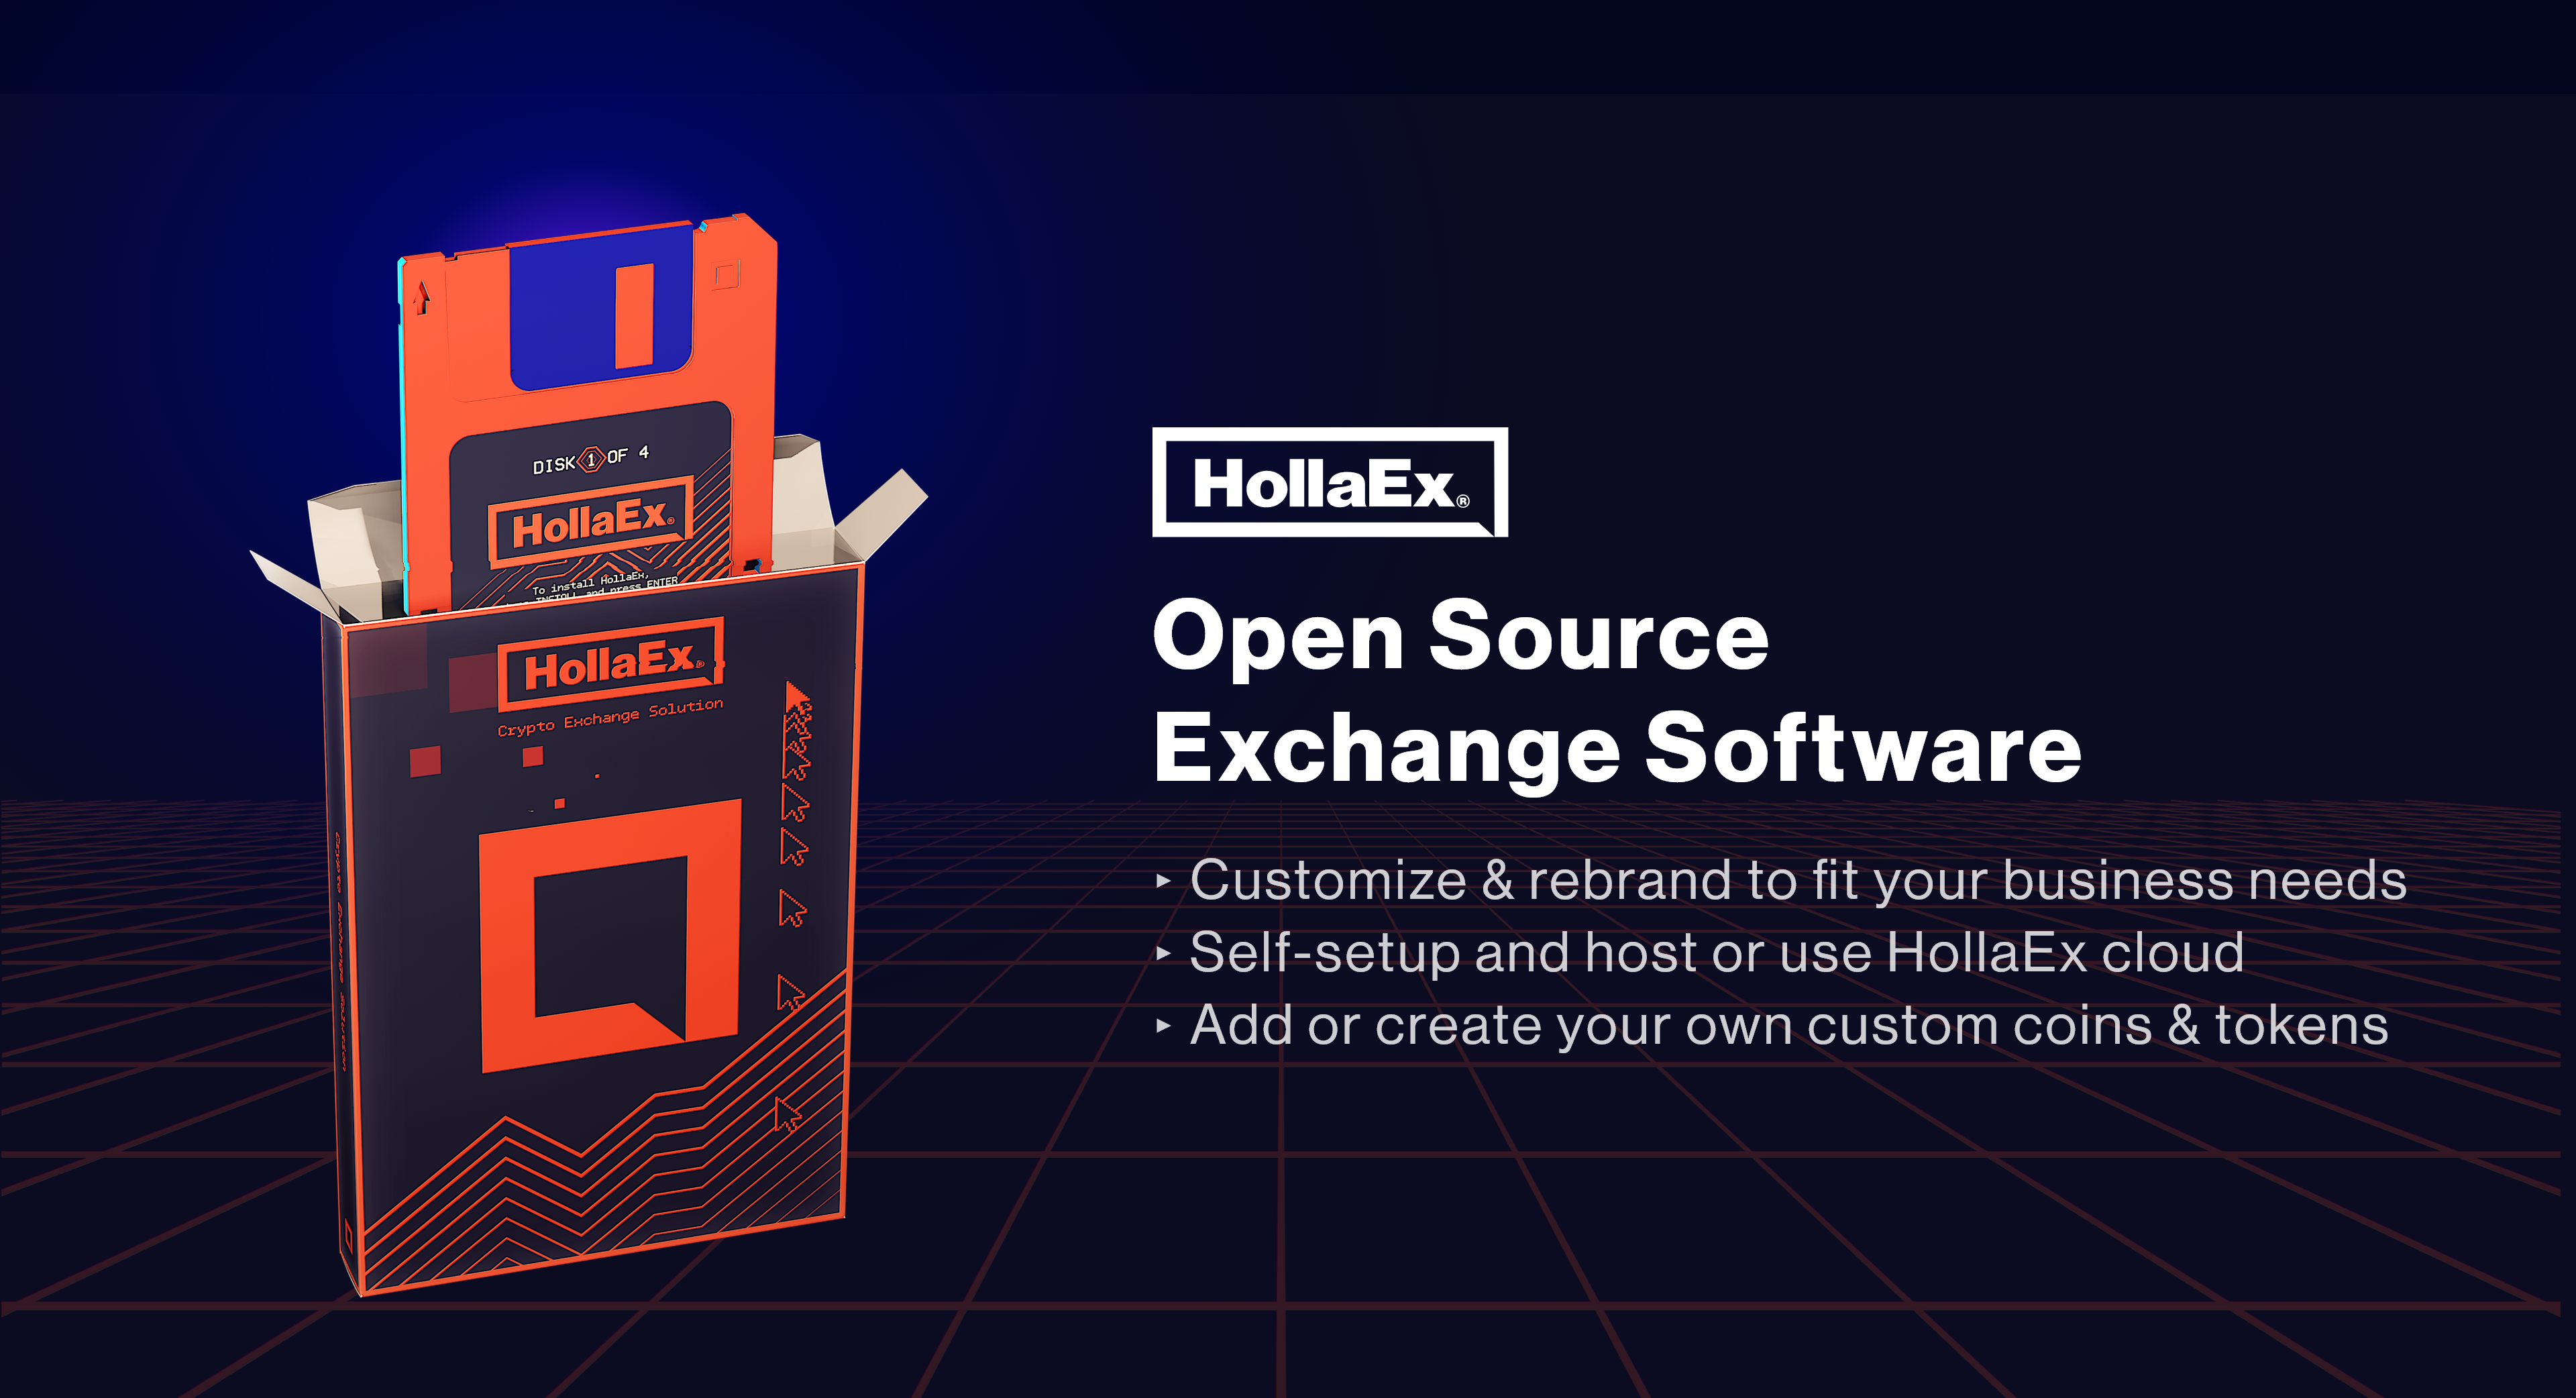 Fully open-source exchange software, easy to setup and operate